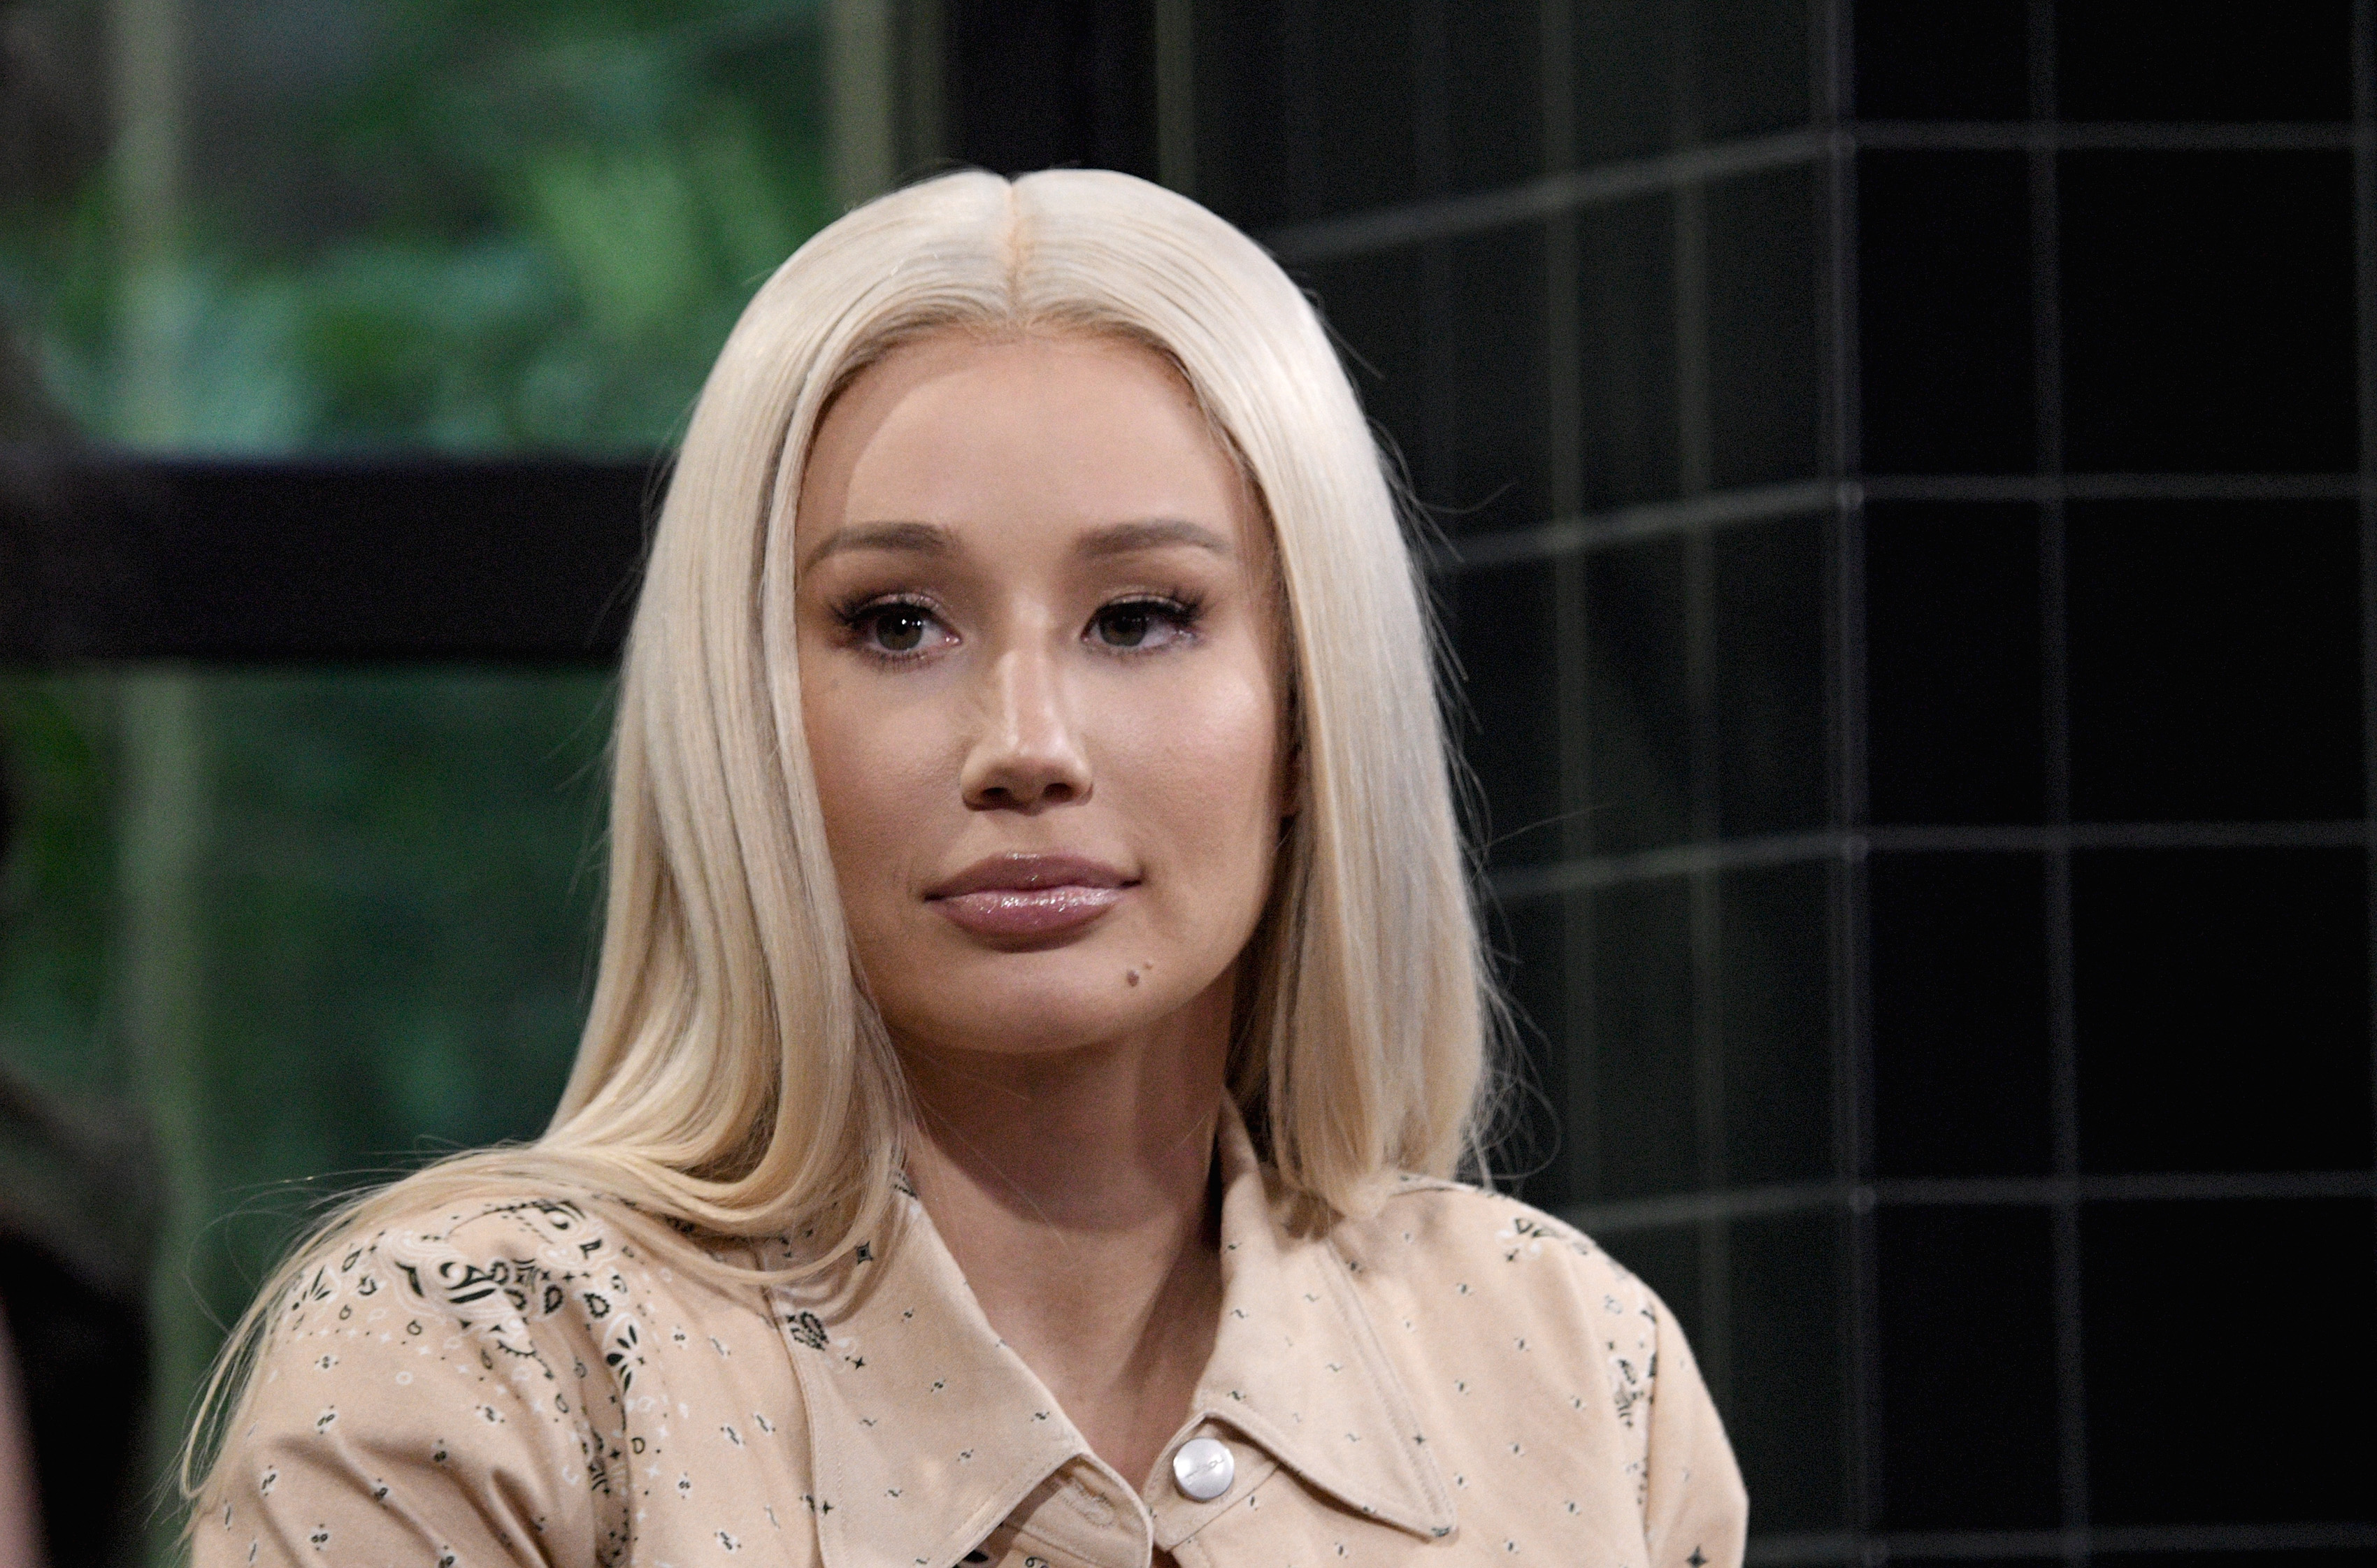 Iggy Azalea visits "The X Change Rate" hosted by Monet X Change during the Build Series on July 25, 2019, in New York City. | Source: Getty Images